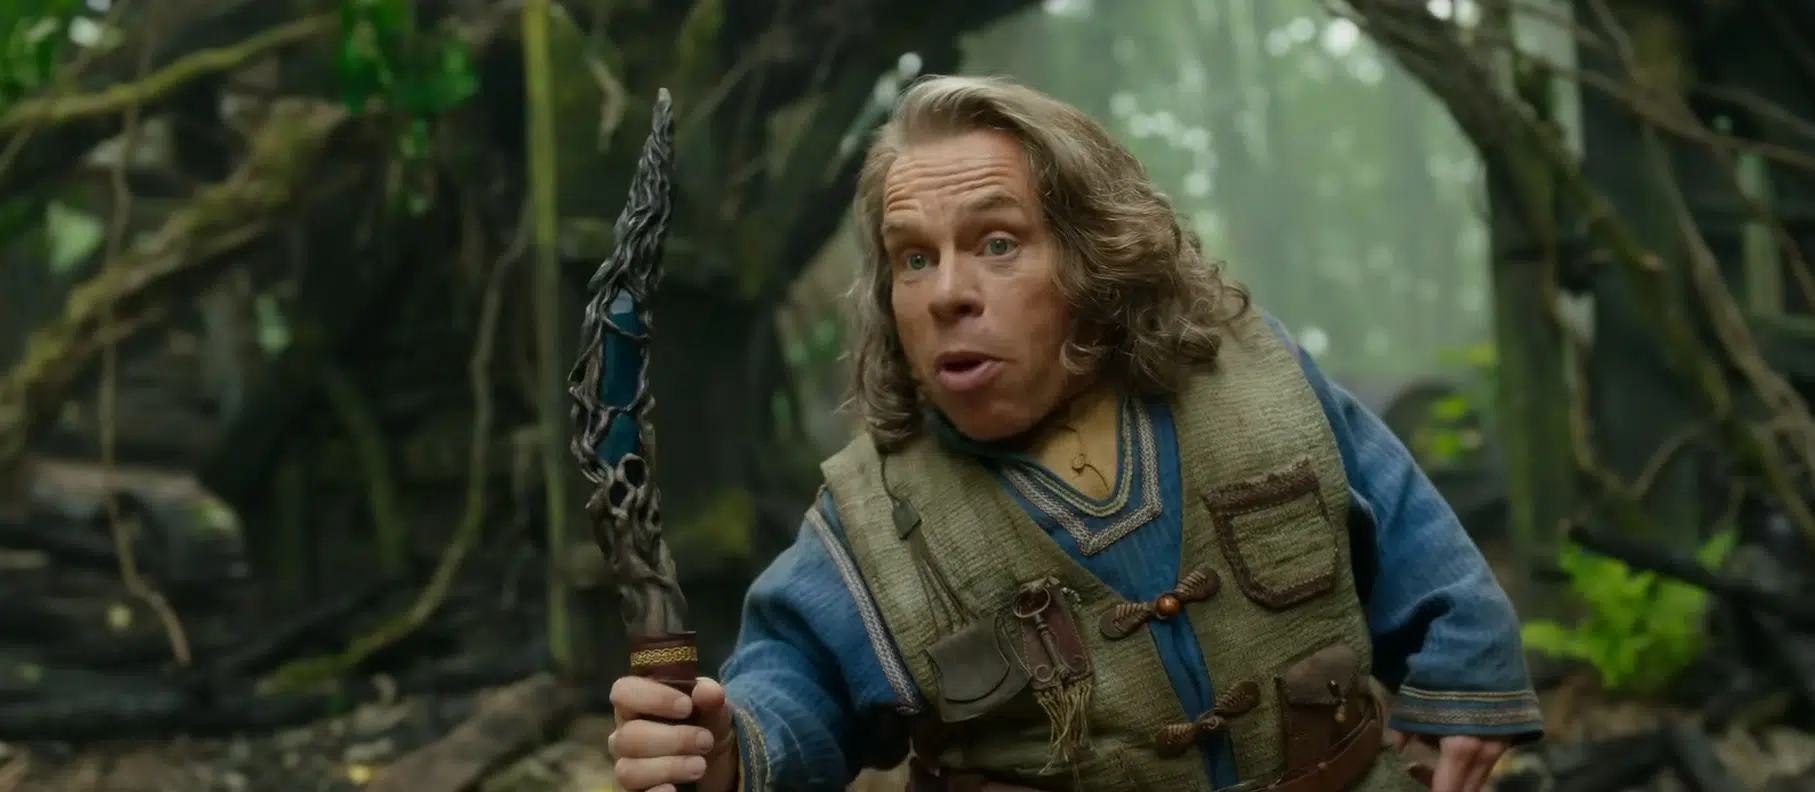 [WATCH] Official Trailer For Disney's 'Willow'